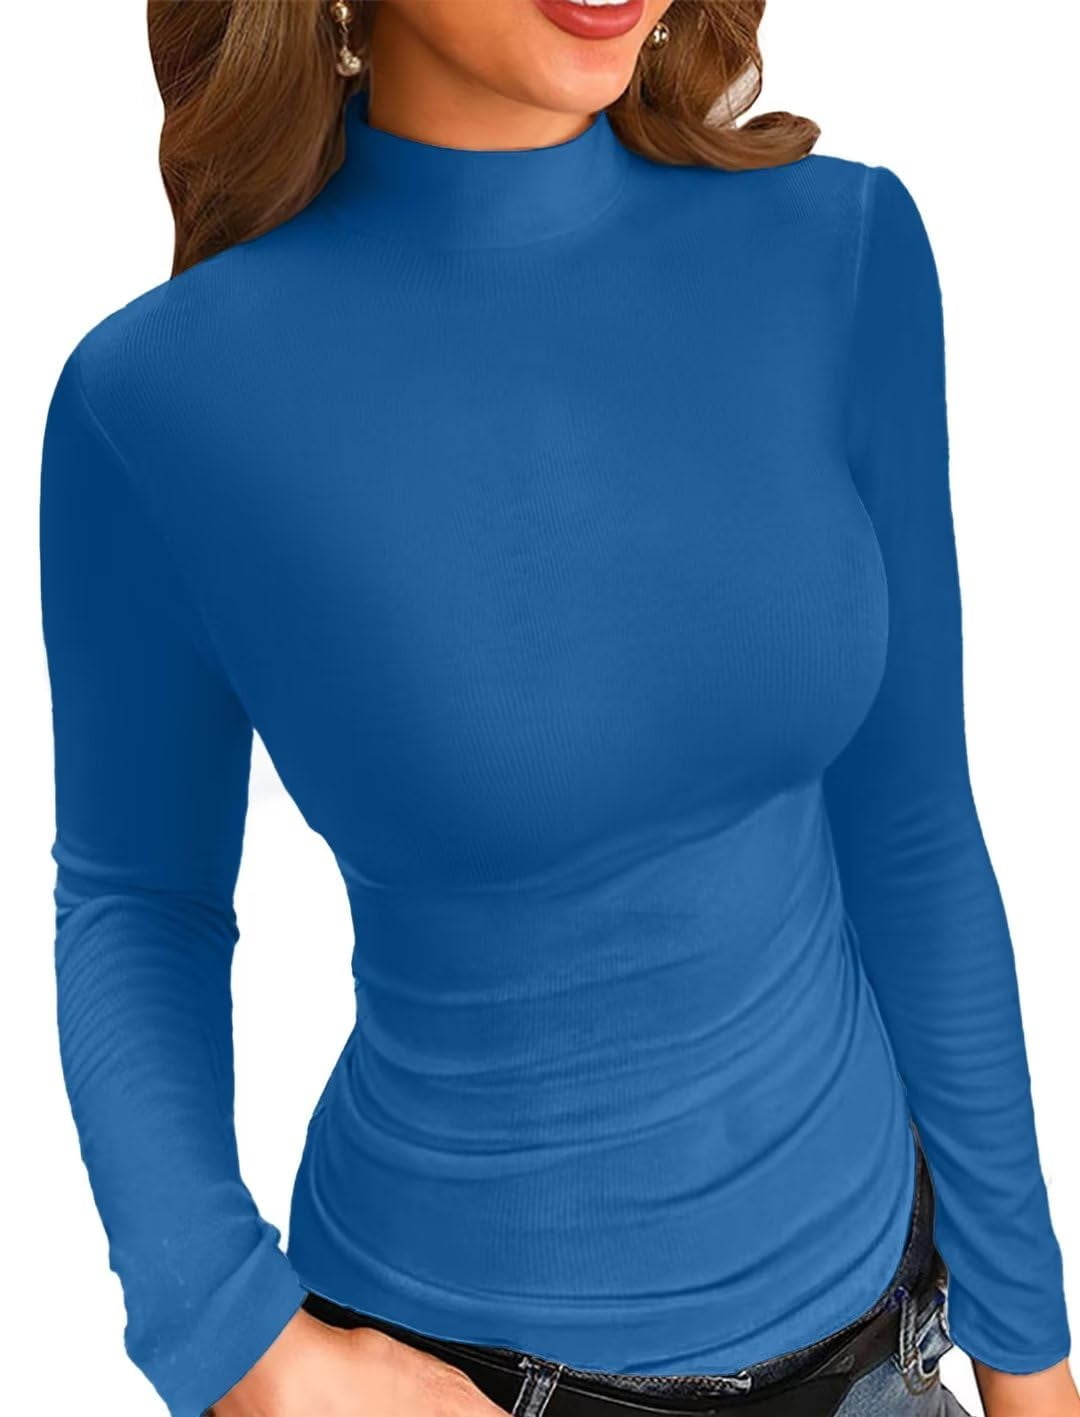 Vafful Long Sleeve T Shirt for Womens Mock Turtle Neck Ribbed Tops